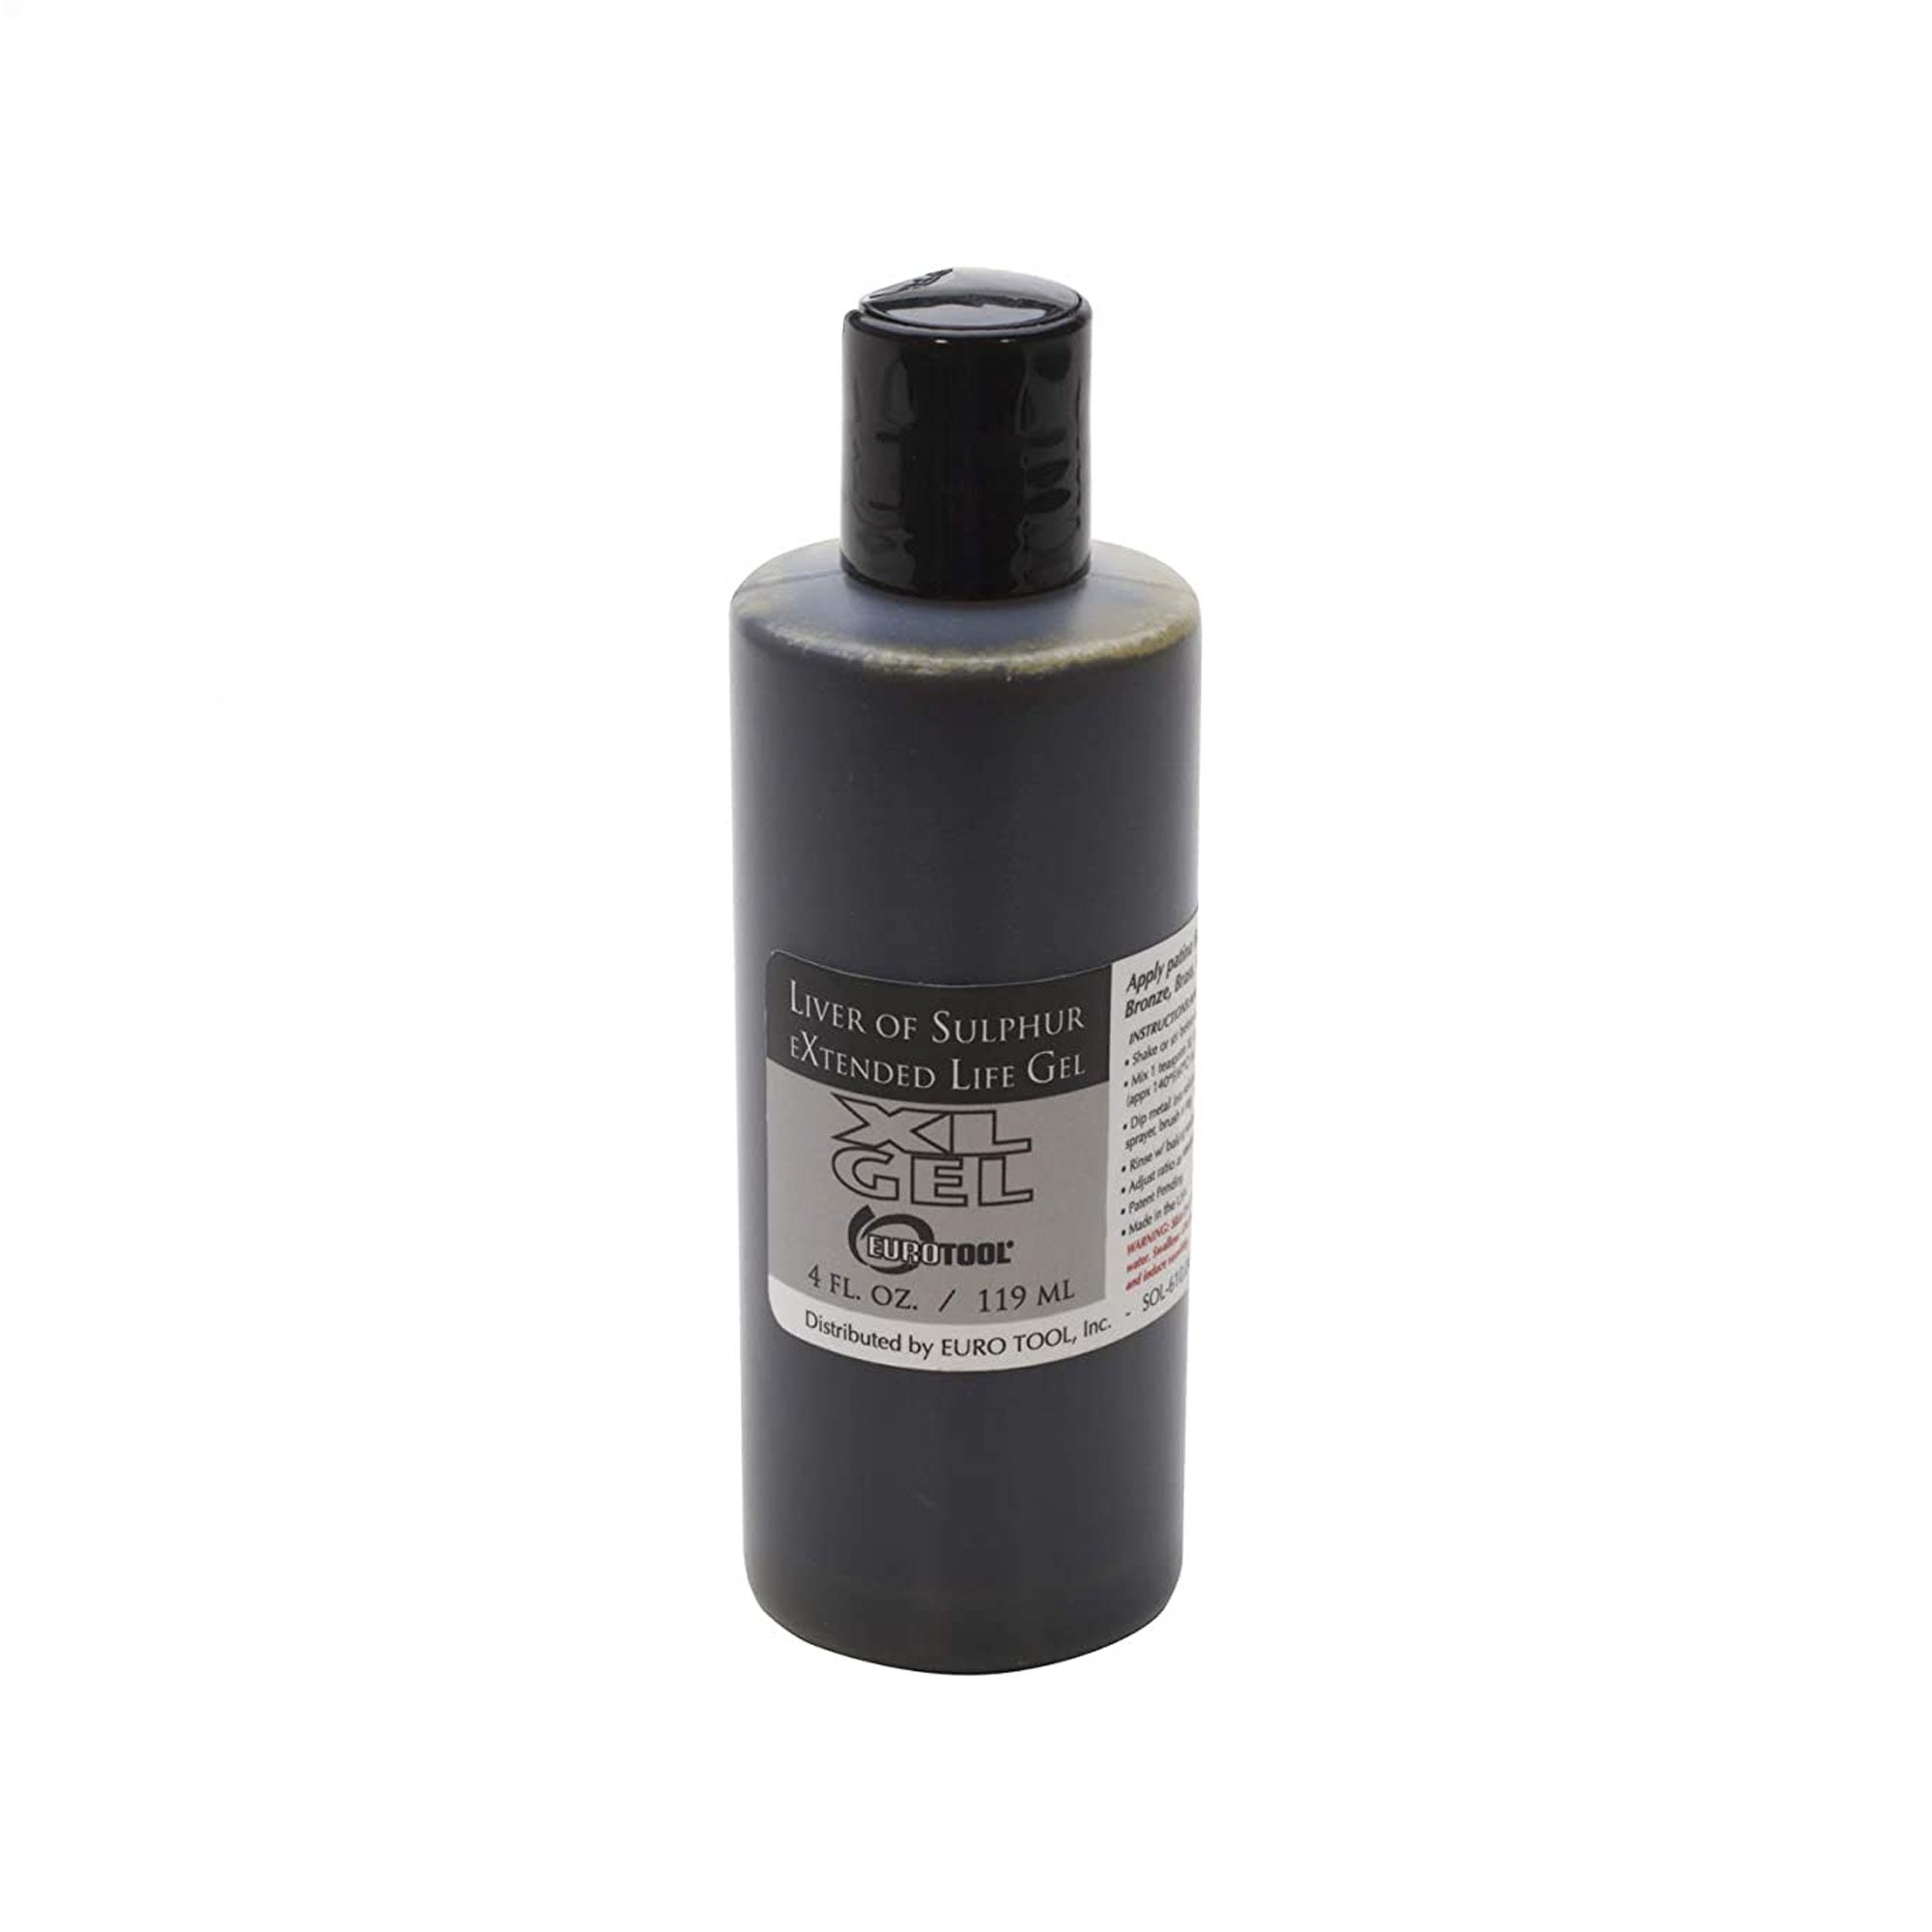 Jax Silver Plating Solution 4oz Bottle. Magical Silver Plating and No Heat  Required. 